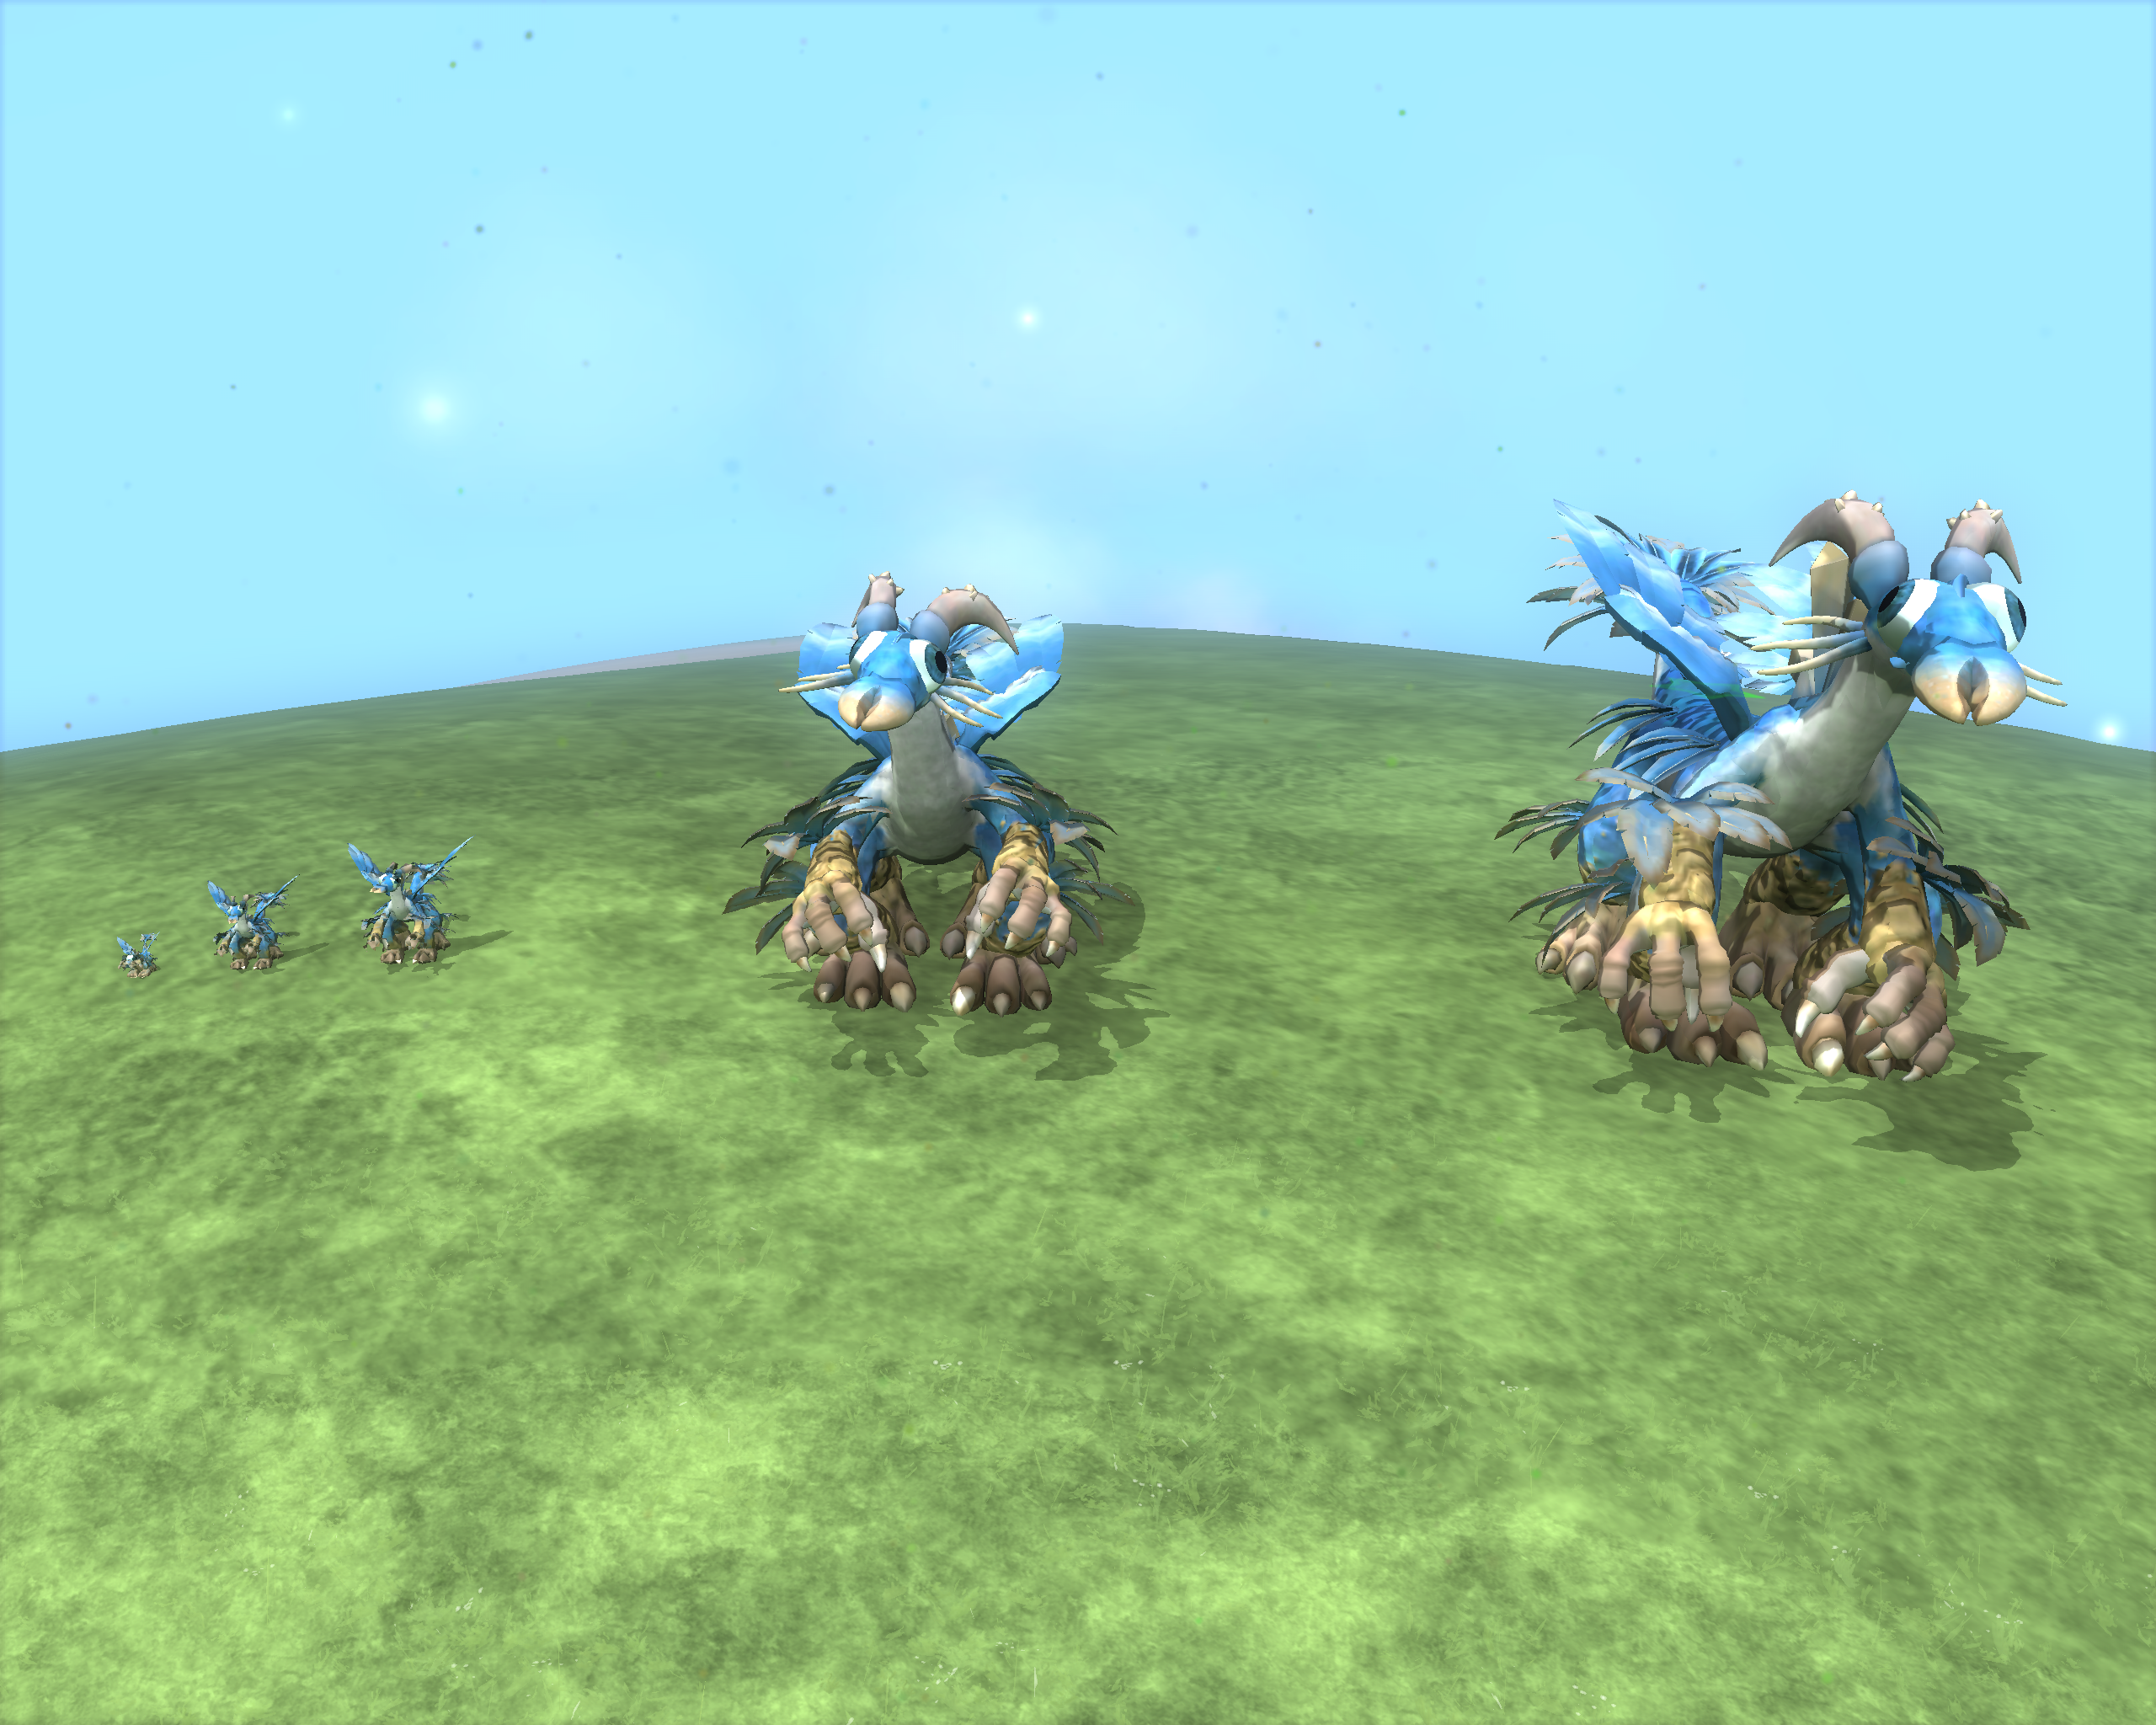 spore pc how to determine size of creature in game